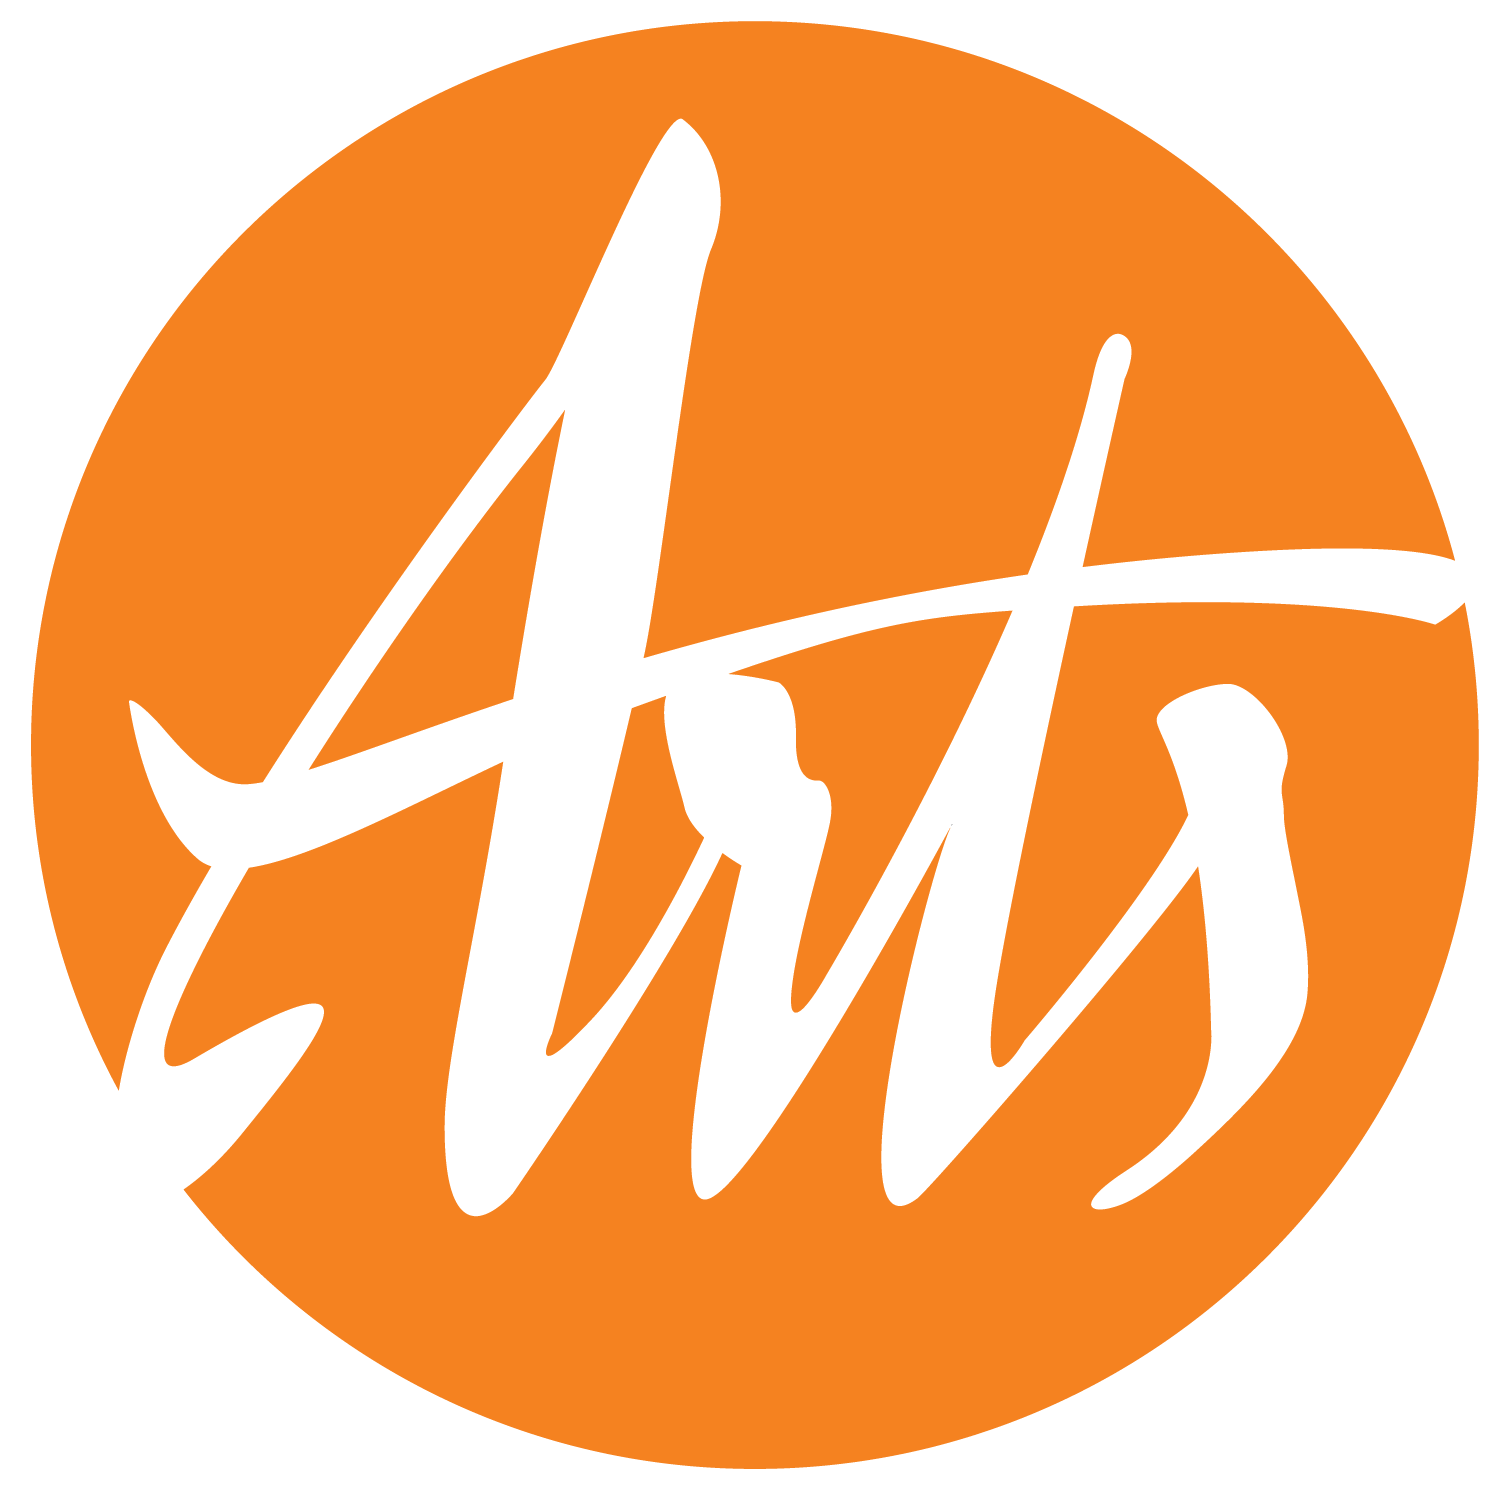 Fund for the Arts